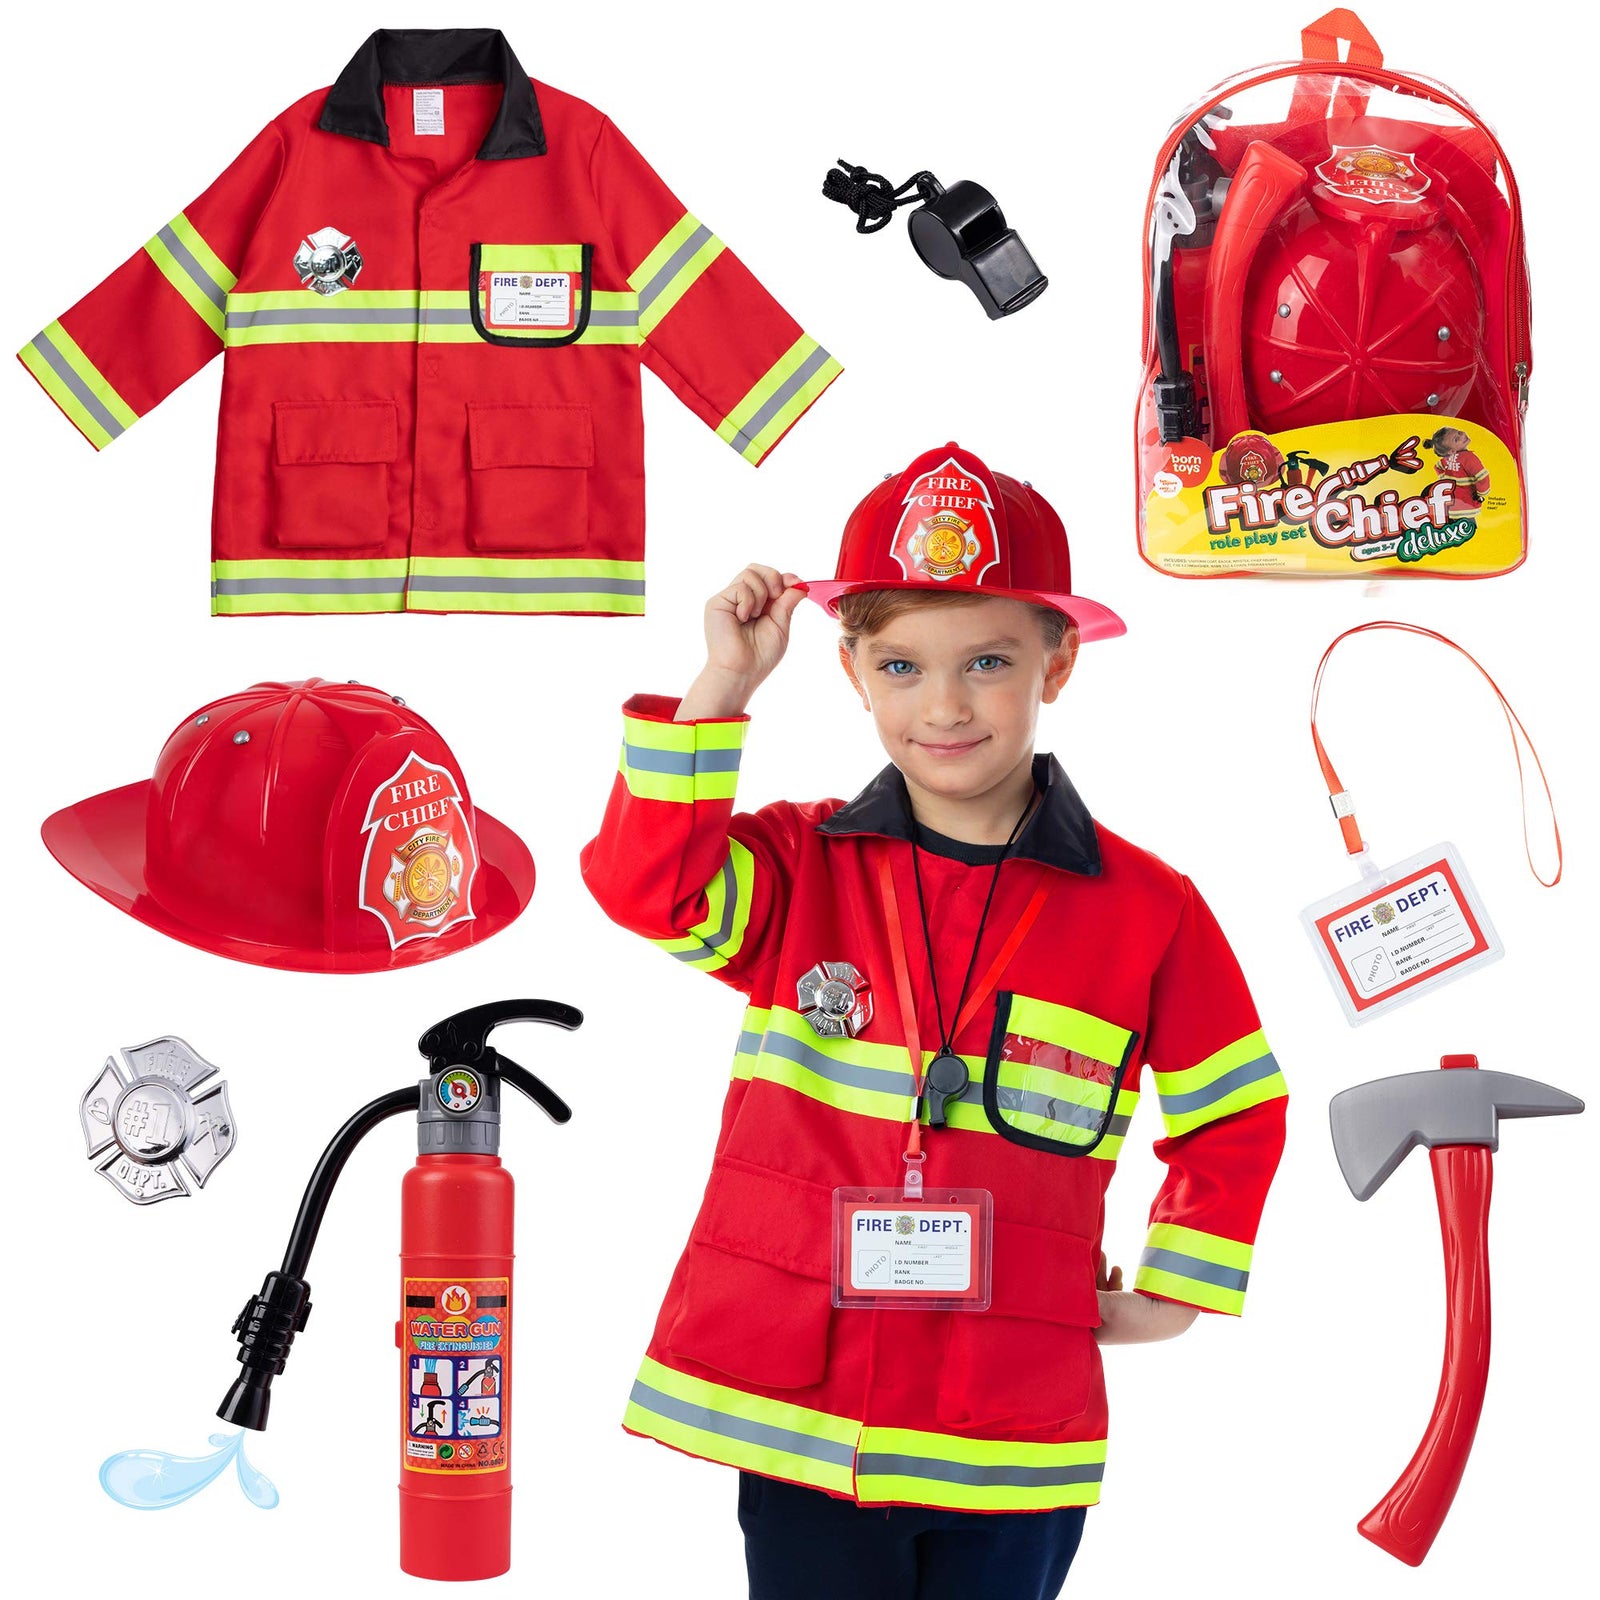 Born Toys 8 PC Premium WASHABLE kids Fireman Costume Toy for kids,Boys,Girls,Toddlers, and children with complete firefighter accessories